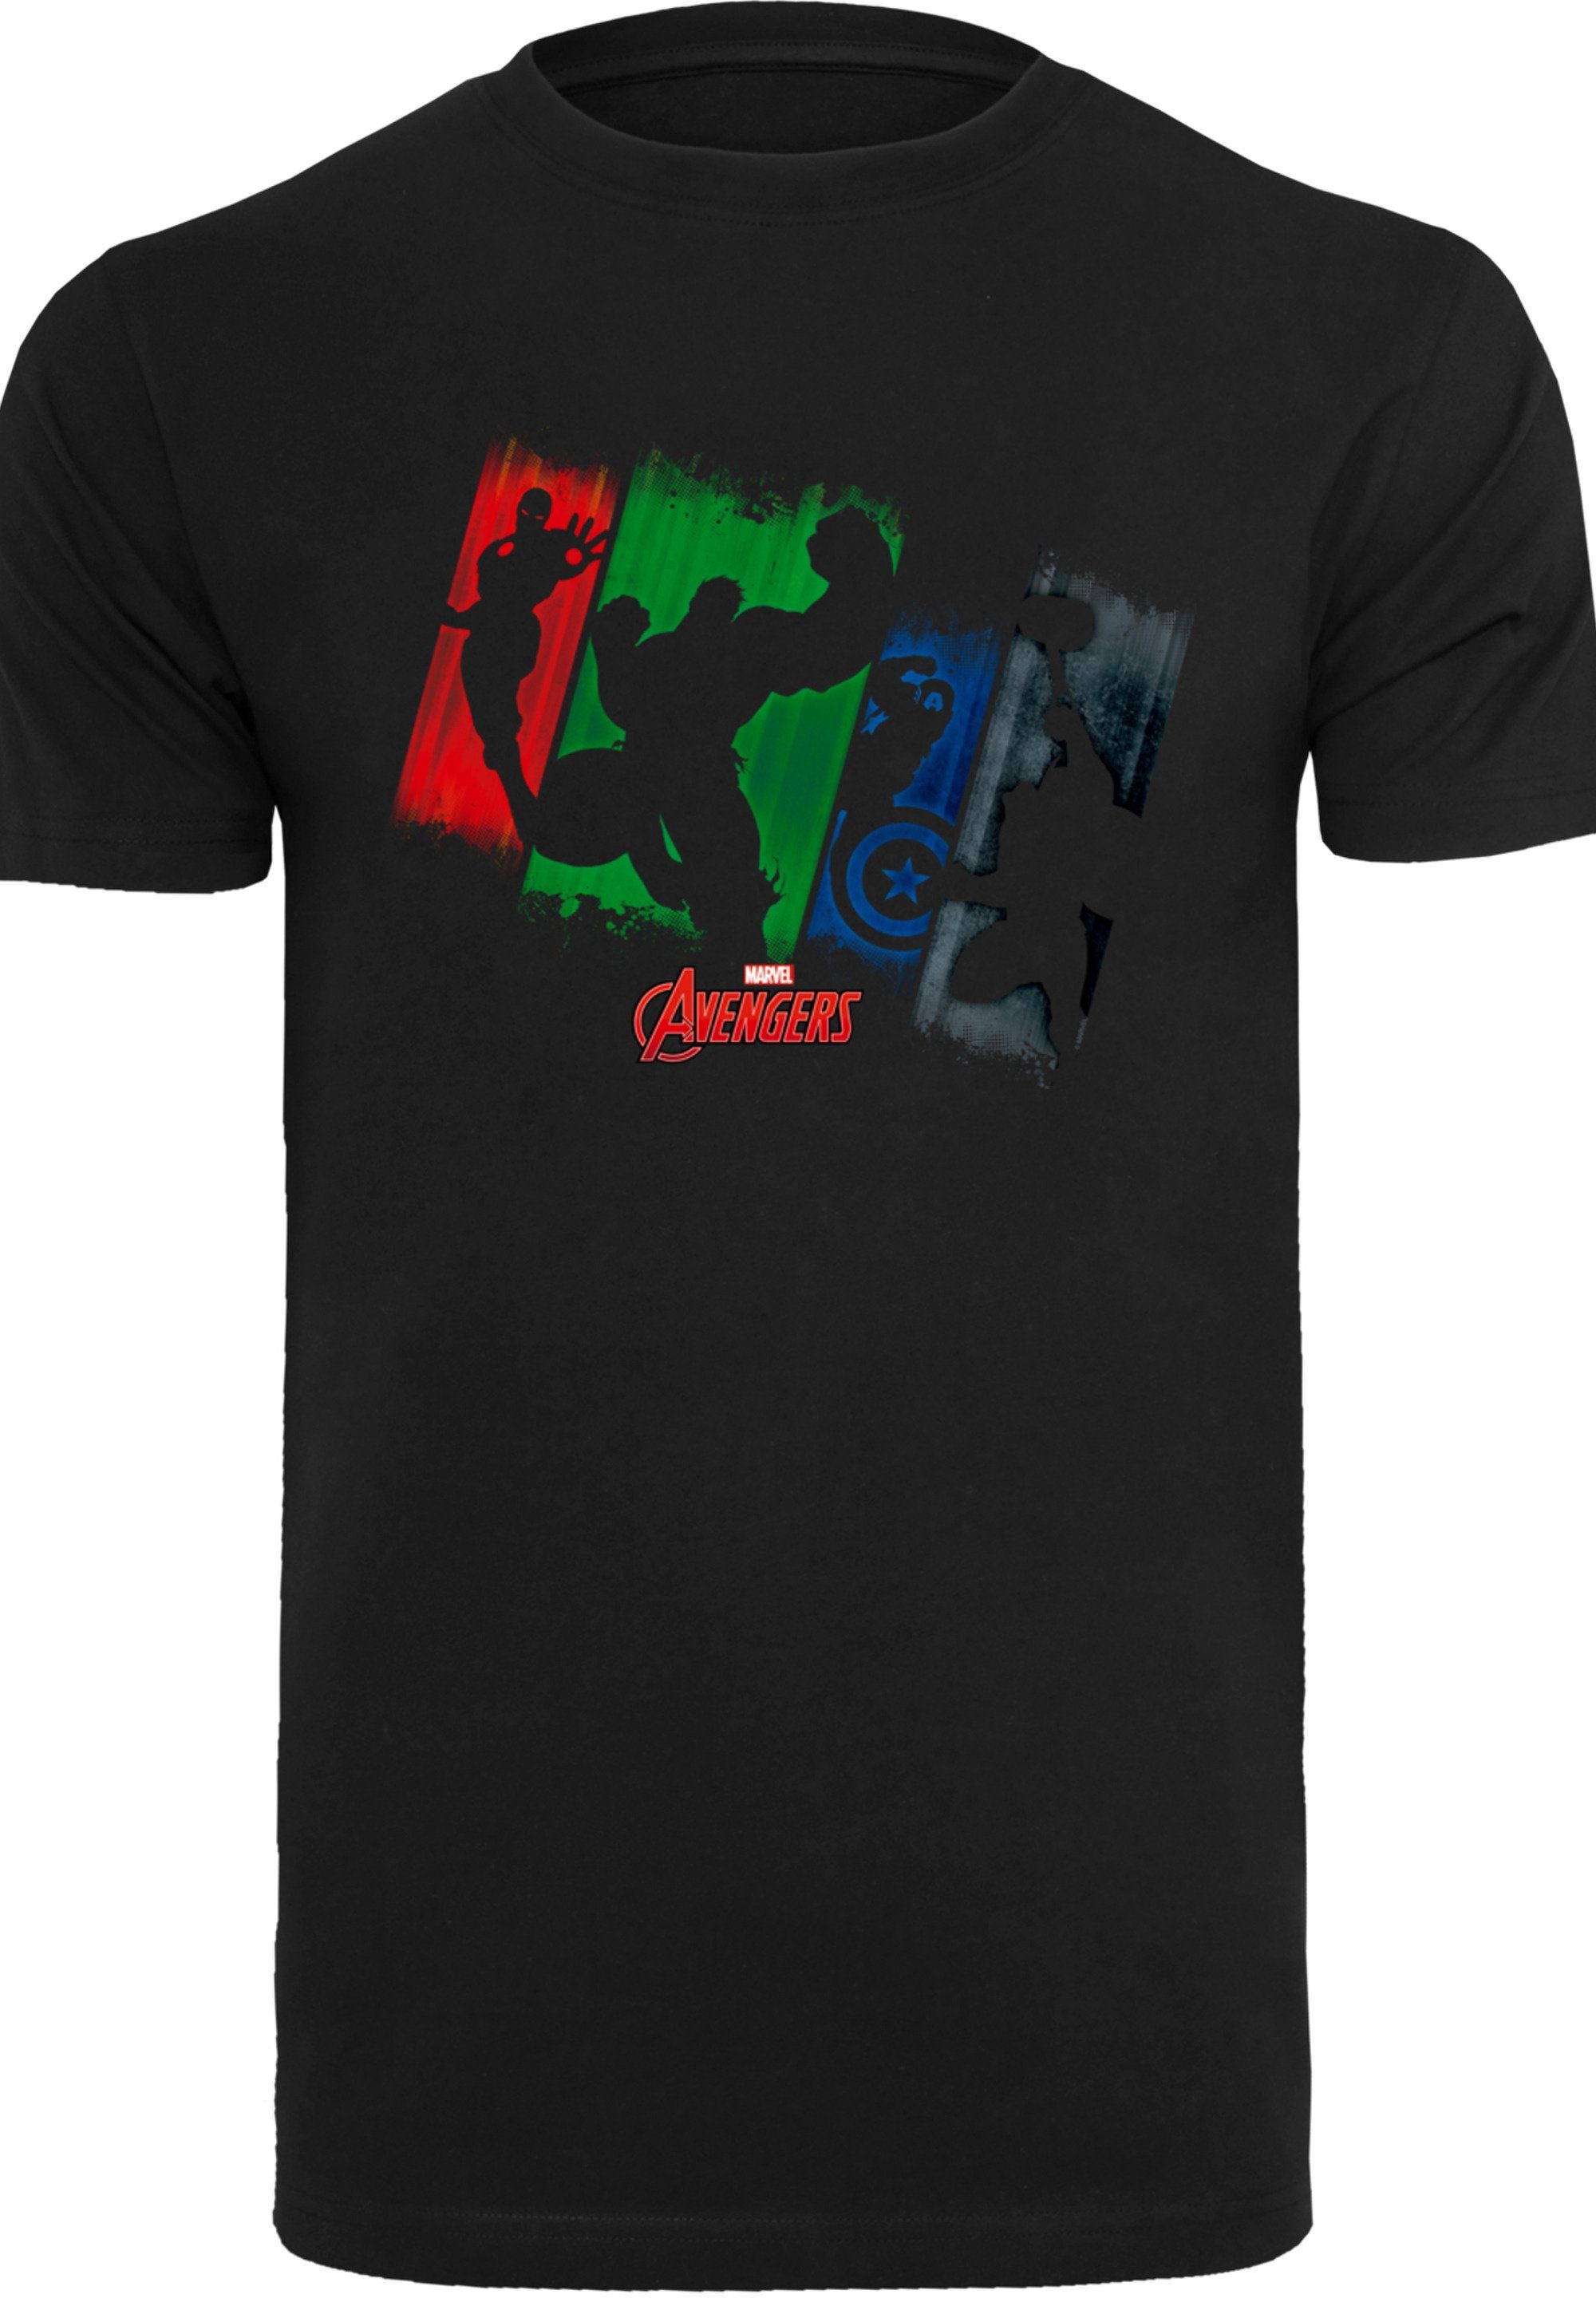 F4NT4STIC T-Shirt schwarz Punch Out' Print Avengers 'Marvel Team